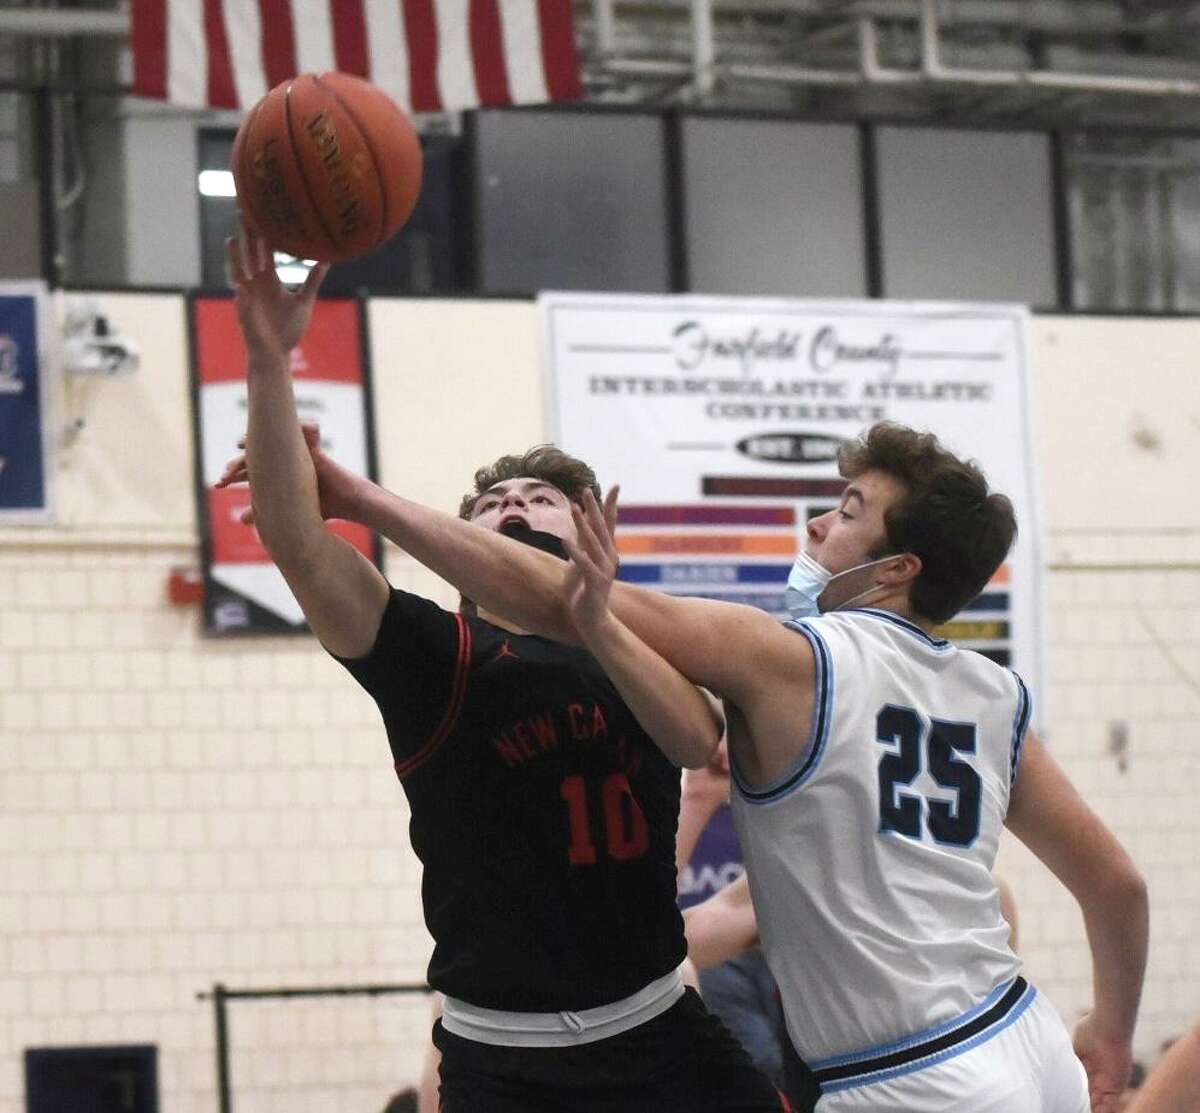 New Canaan’s Ty Groff is fouled by Wilton’s Craig Hyzy on Friday, Jan. 14, 2022.